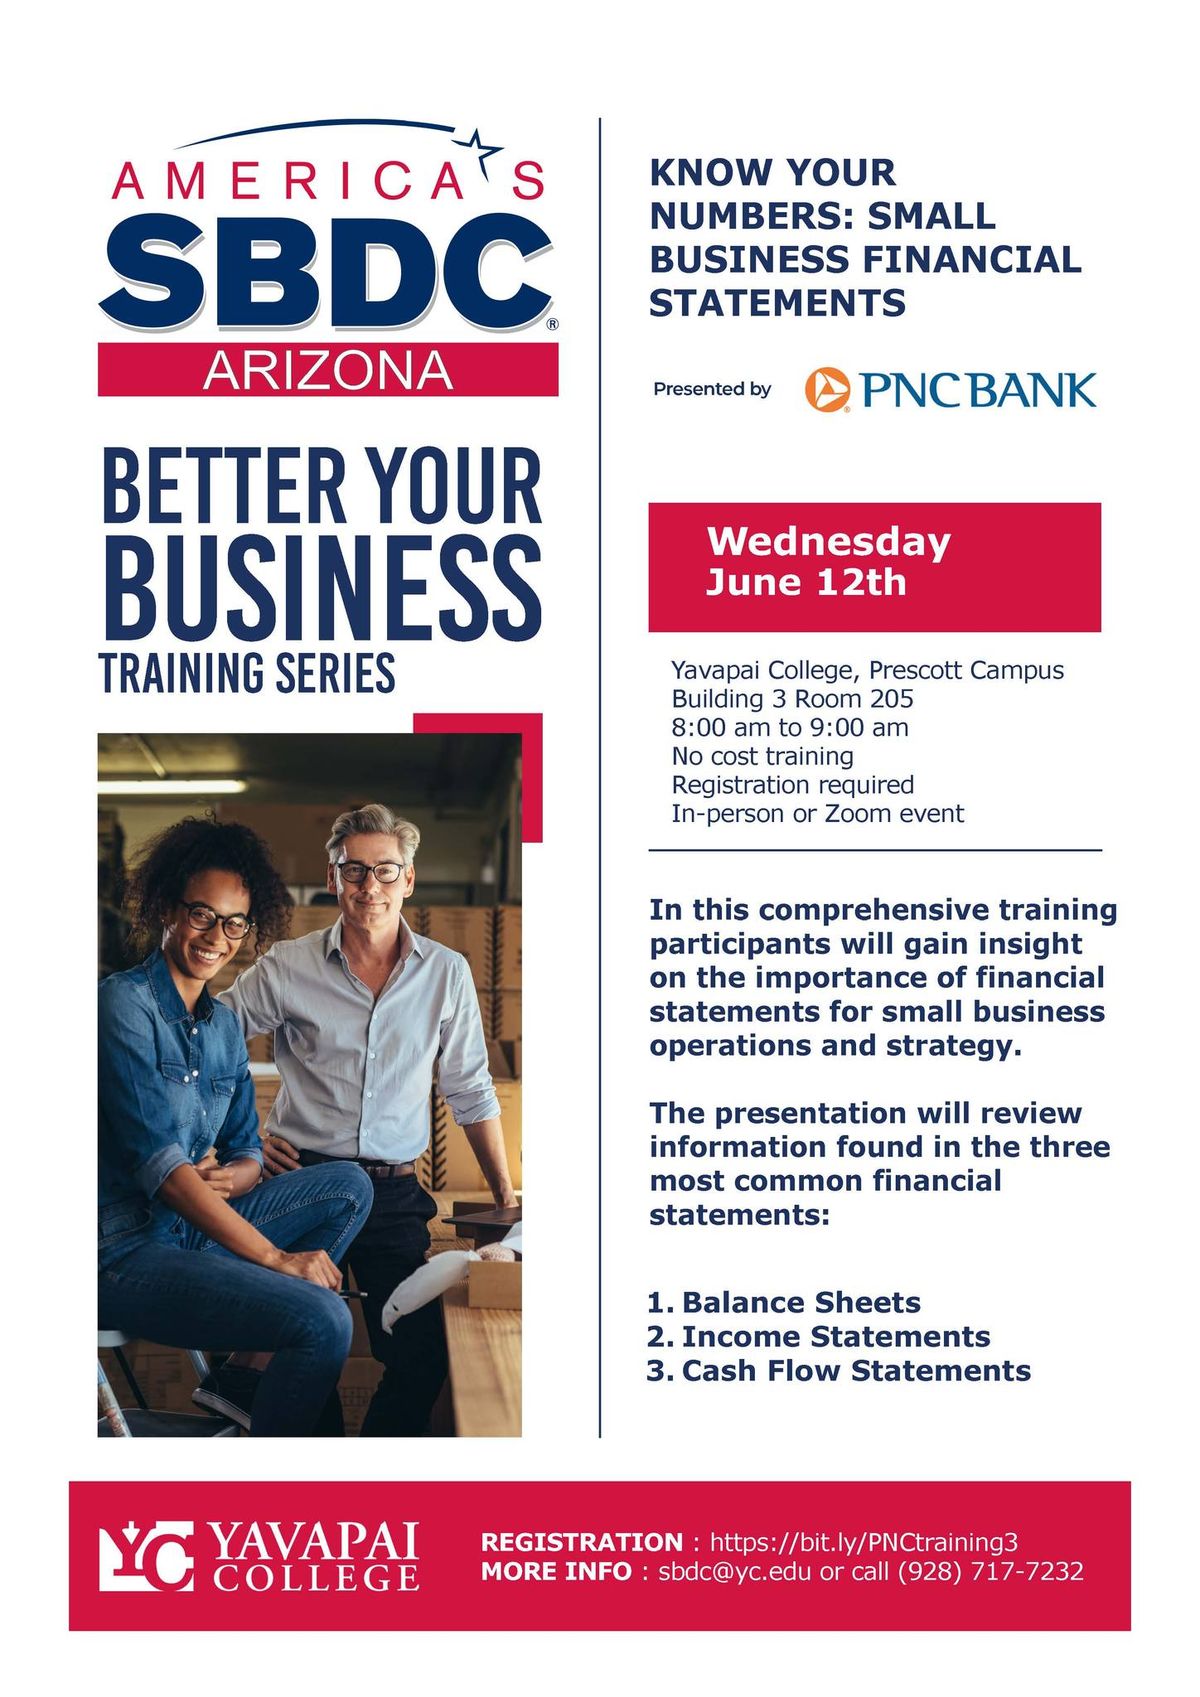 Better Your Business Training Series - Know Your Numbers: Small Business Financial Statements